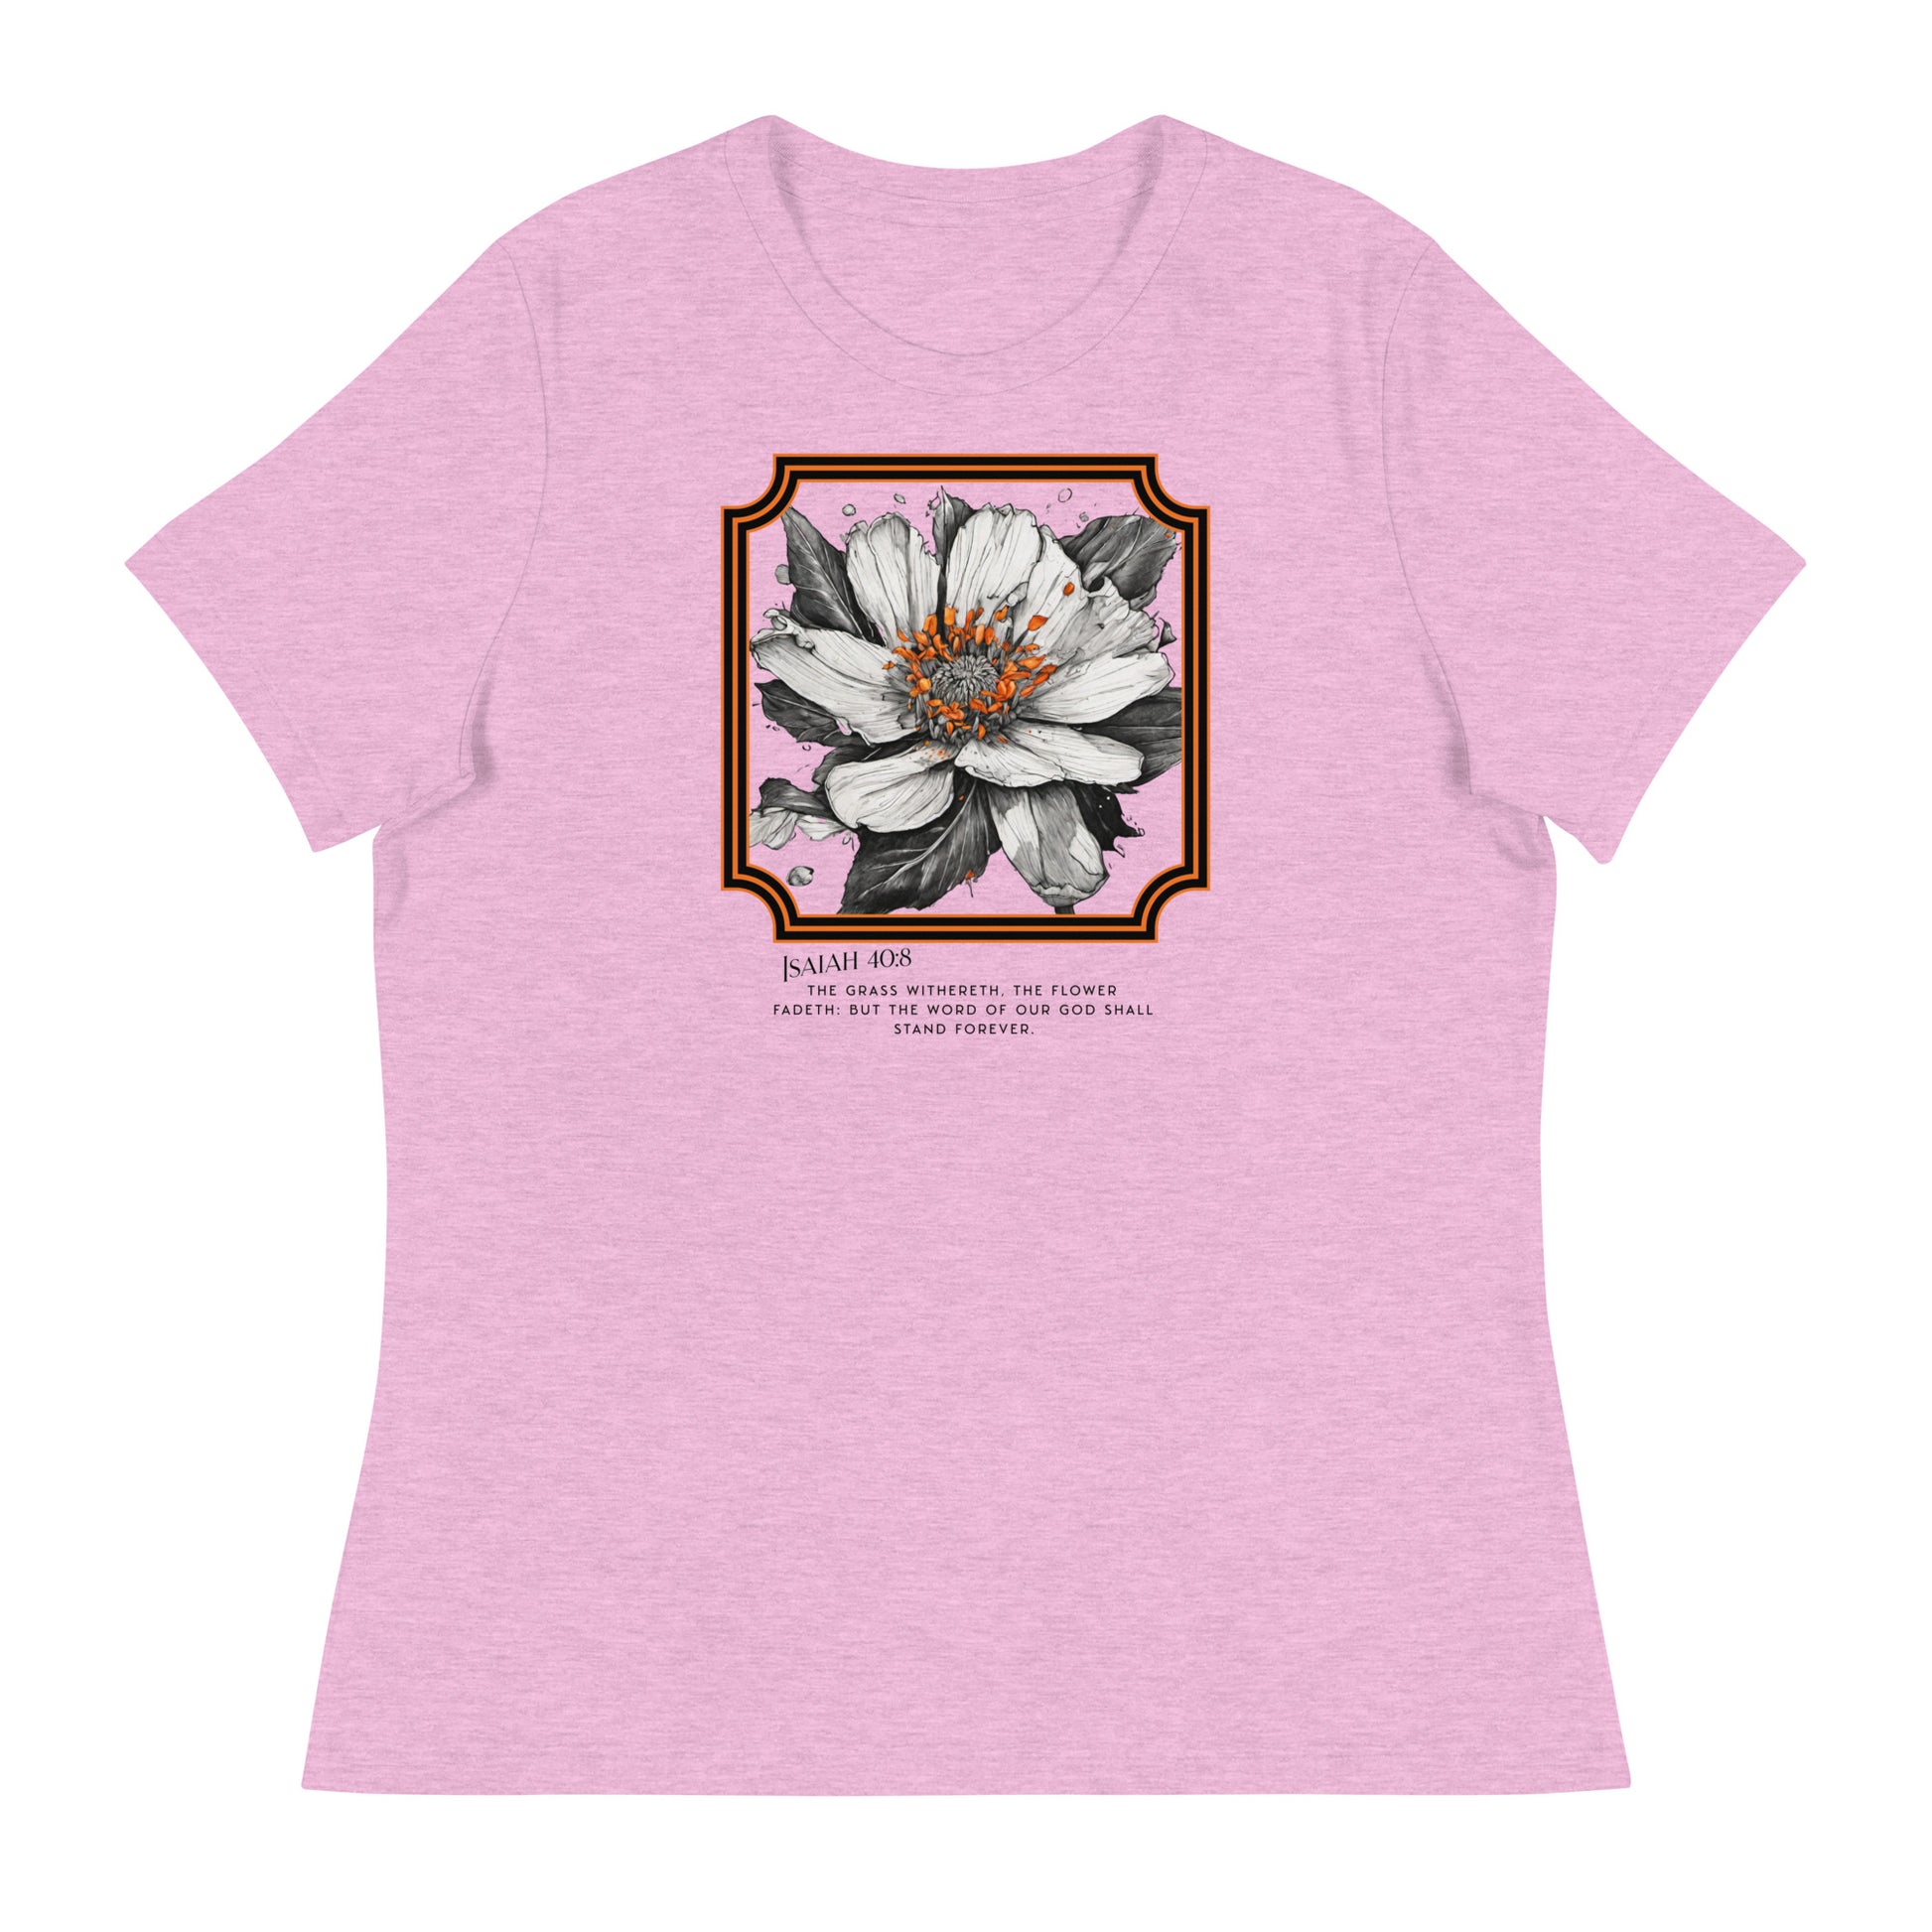 Isaiah 40:8 Flower Fadeth Women's Christian Graphic T-Shirt Heather Prism Lilac